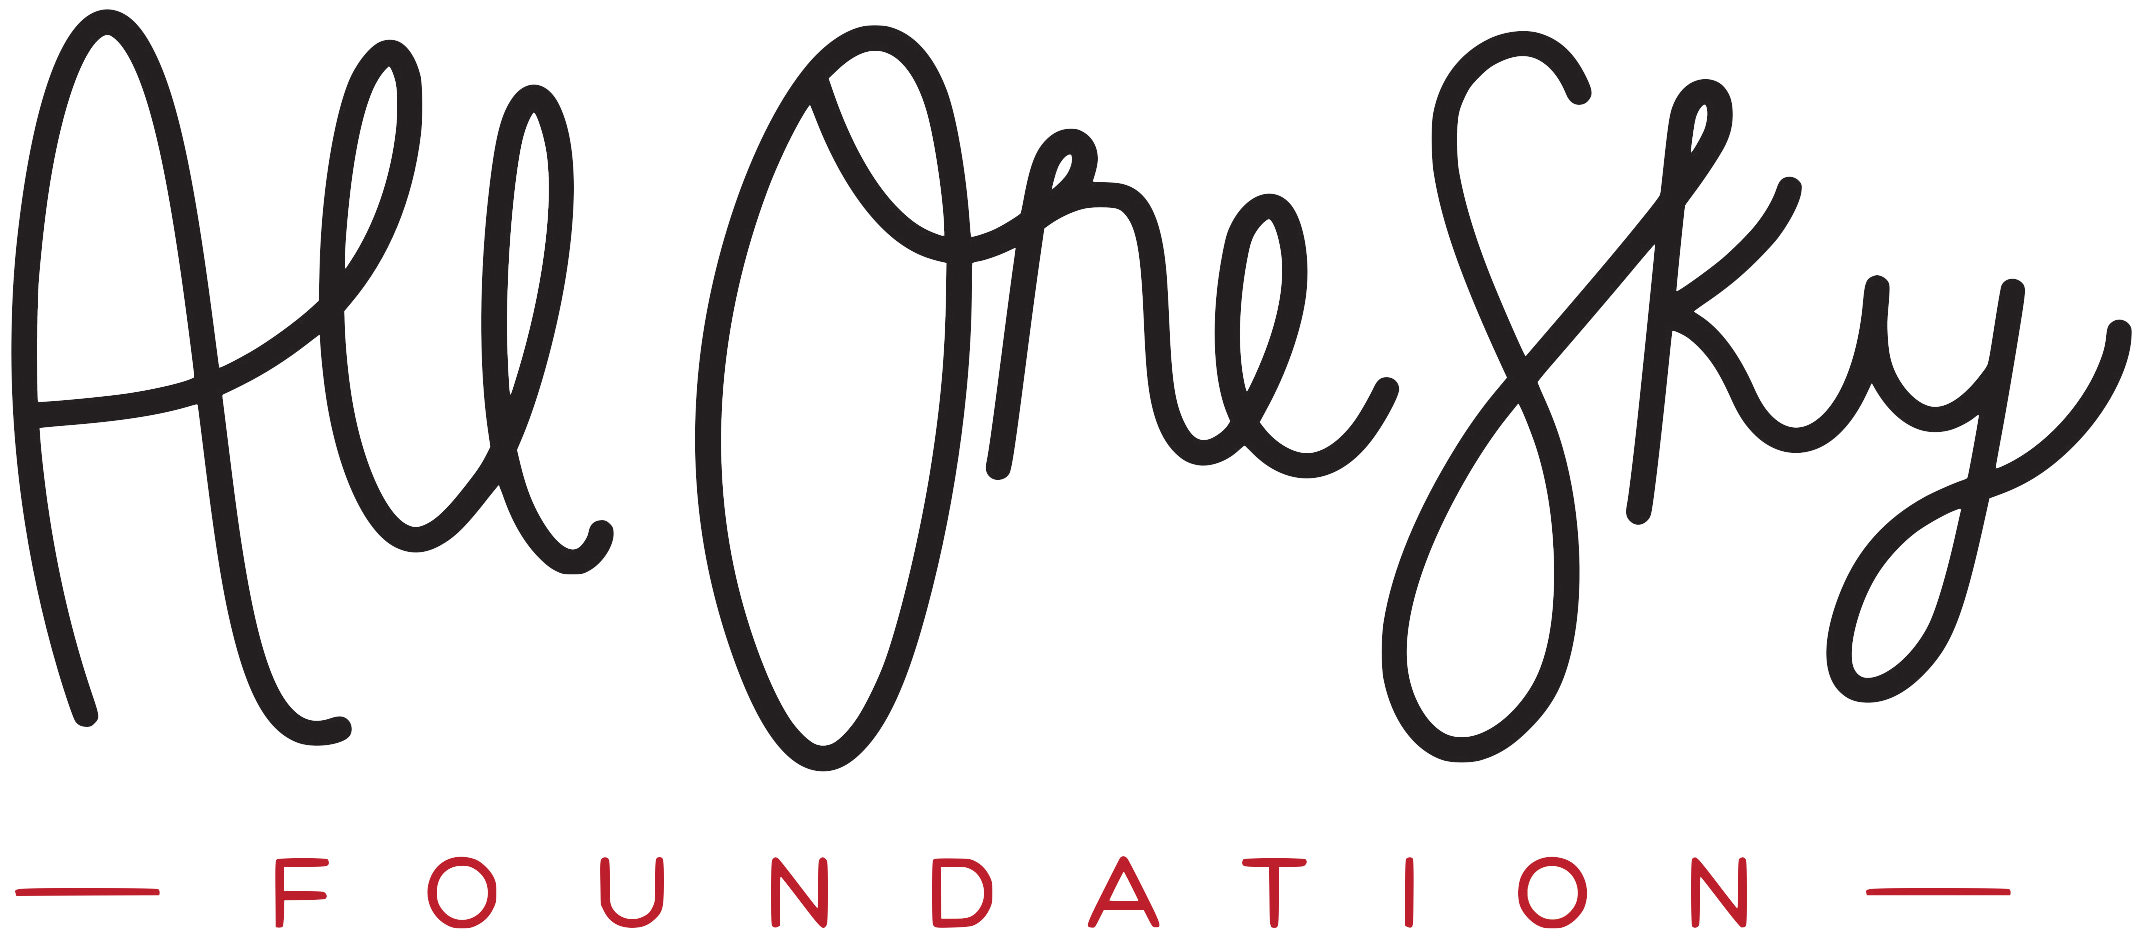 Logo for All One Sky Foundation on a transparent background